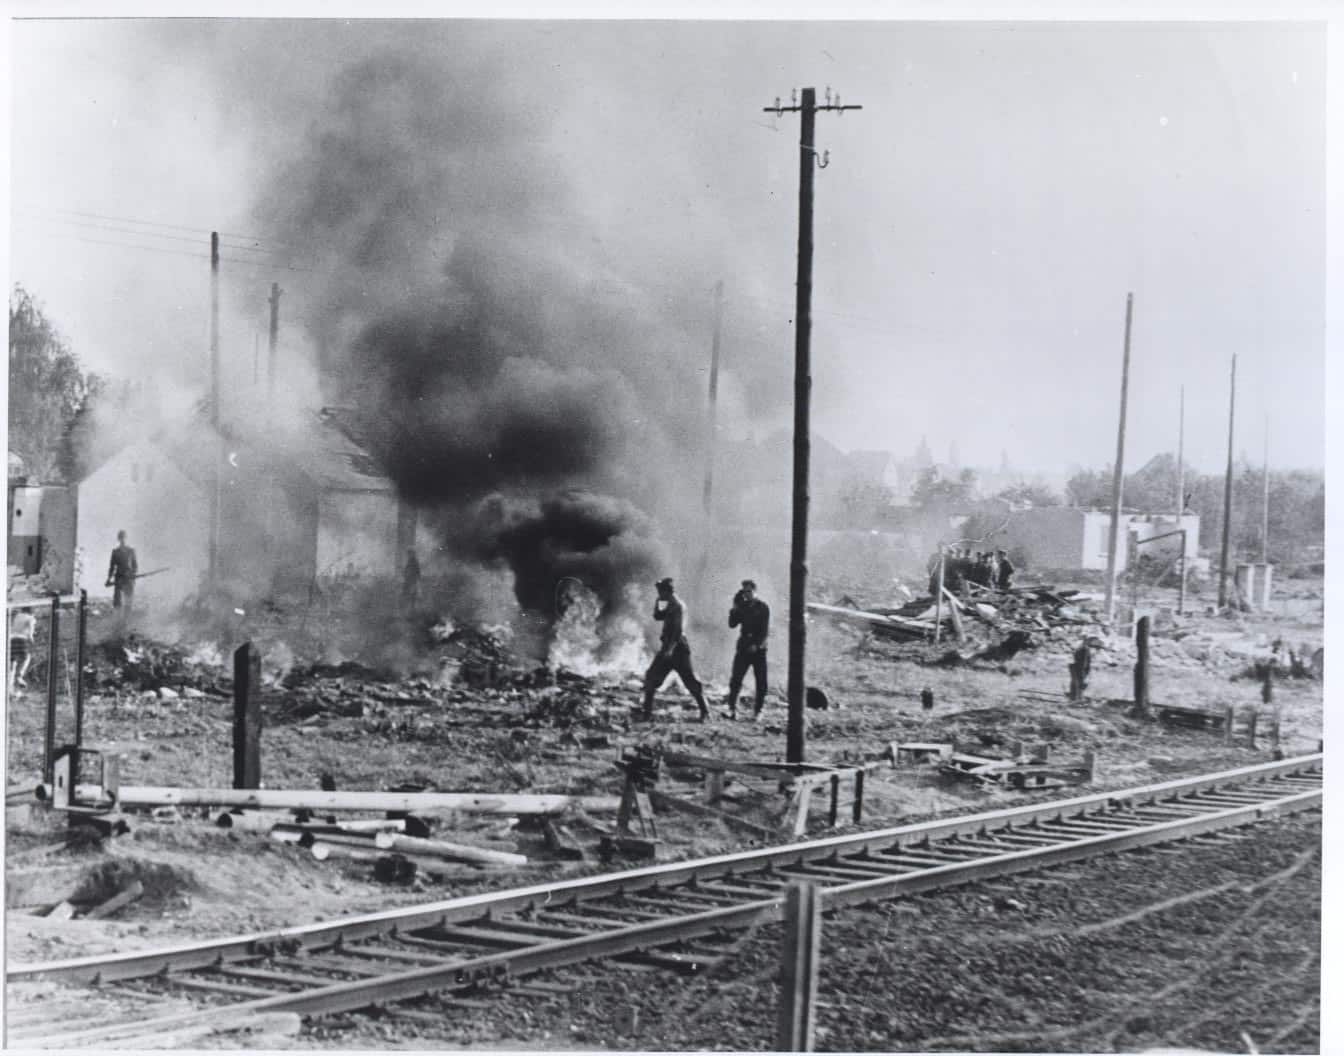 East Germans continue to clear the land flanking the eastern side of the border, burning what’s left of the houses that were razed to provide a clear line of fire at anyone seeking to cross into West Berlin. October 1961. From the CIA booklet "A City Torn Apart: Building of the Berlin Wall."